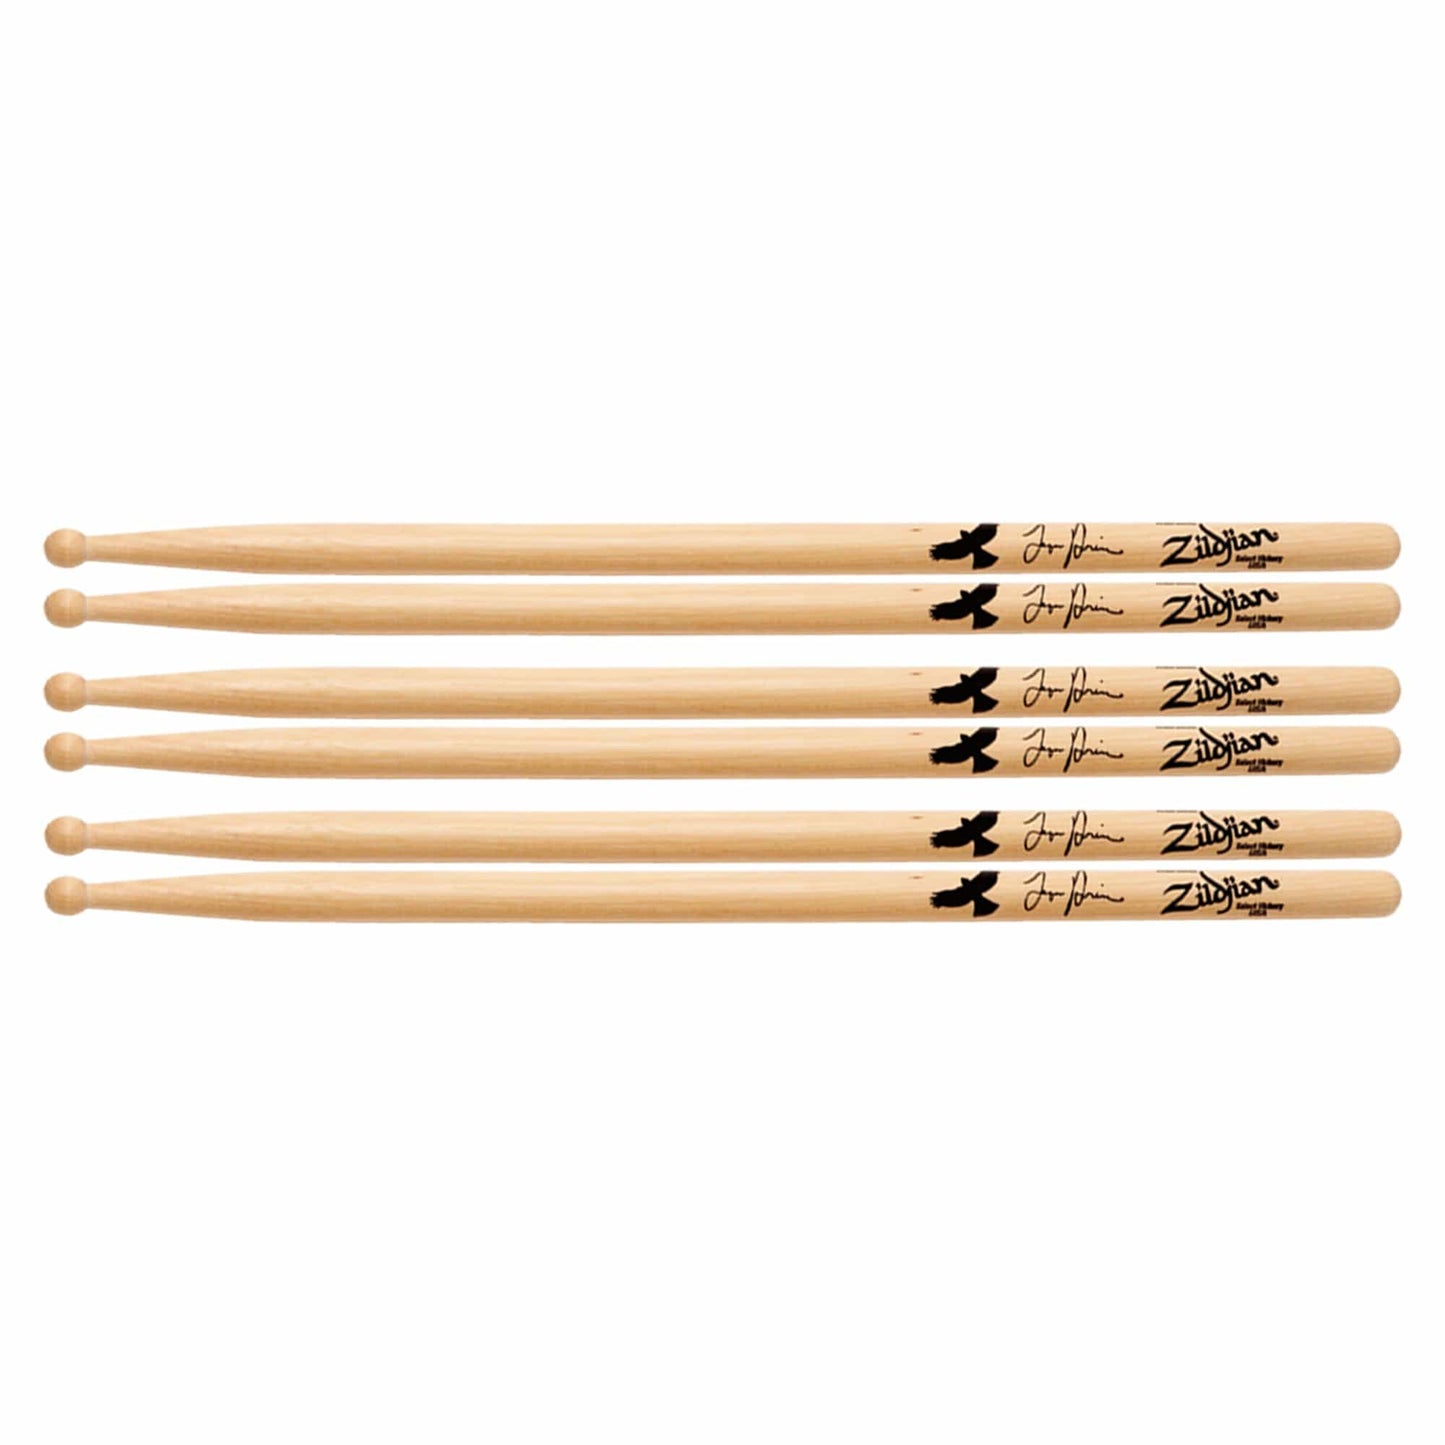 Zildjian Taylor Hawkins Signature Drum Sticks (3 Pair Bundle) Drums and Percussion / Parts and Accessories / Drum Sticks and Mallets